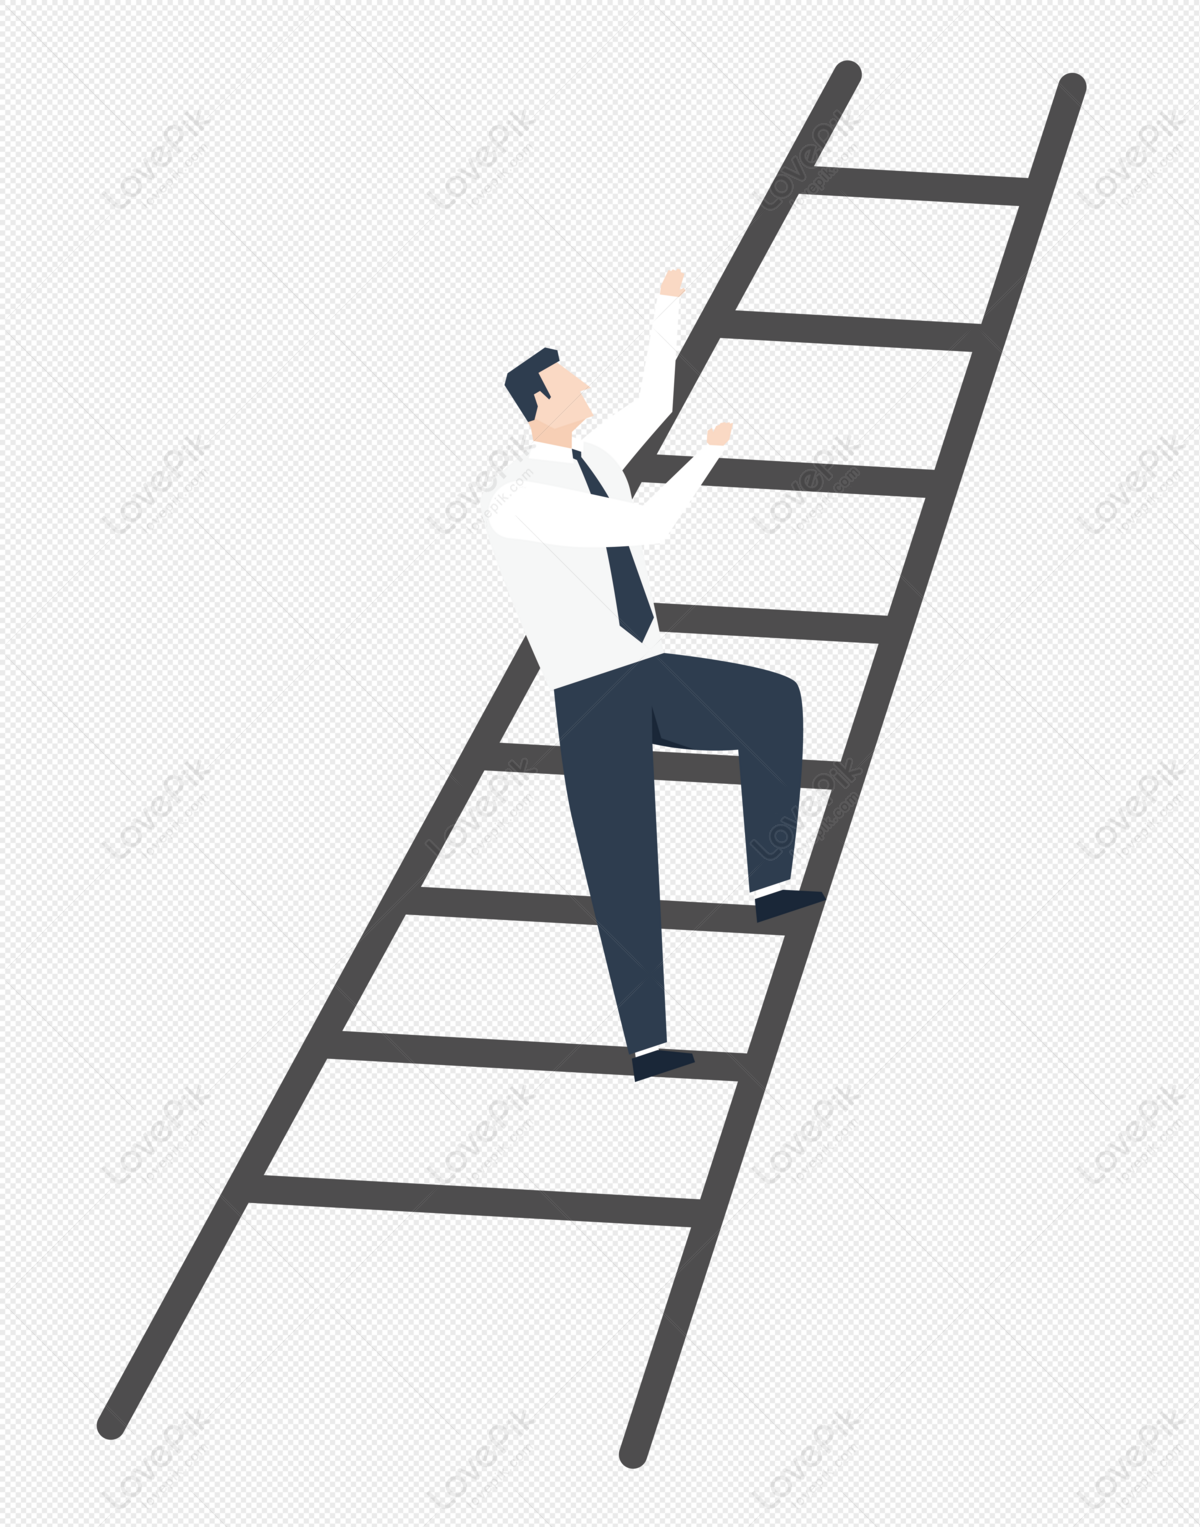 Children Climb Stairs PNG Images With Transparent Background | Free ...